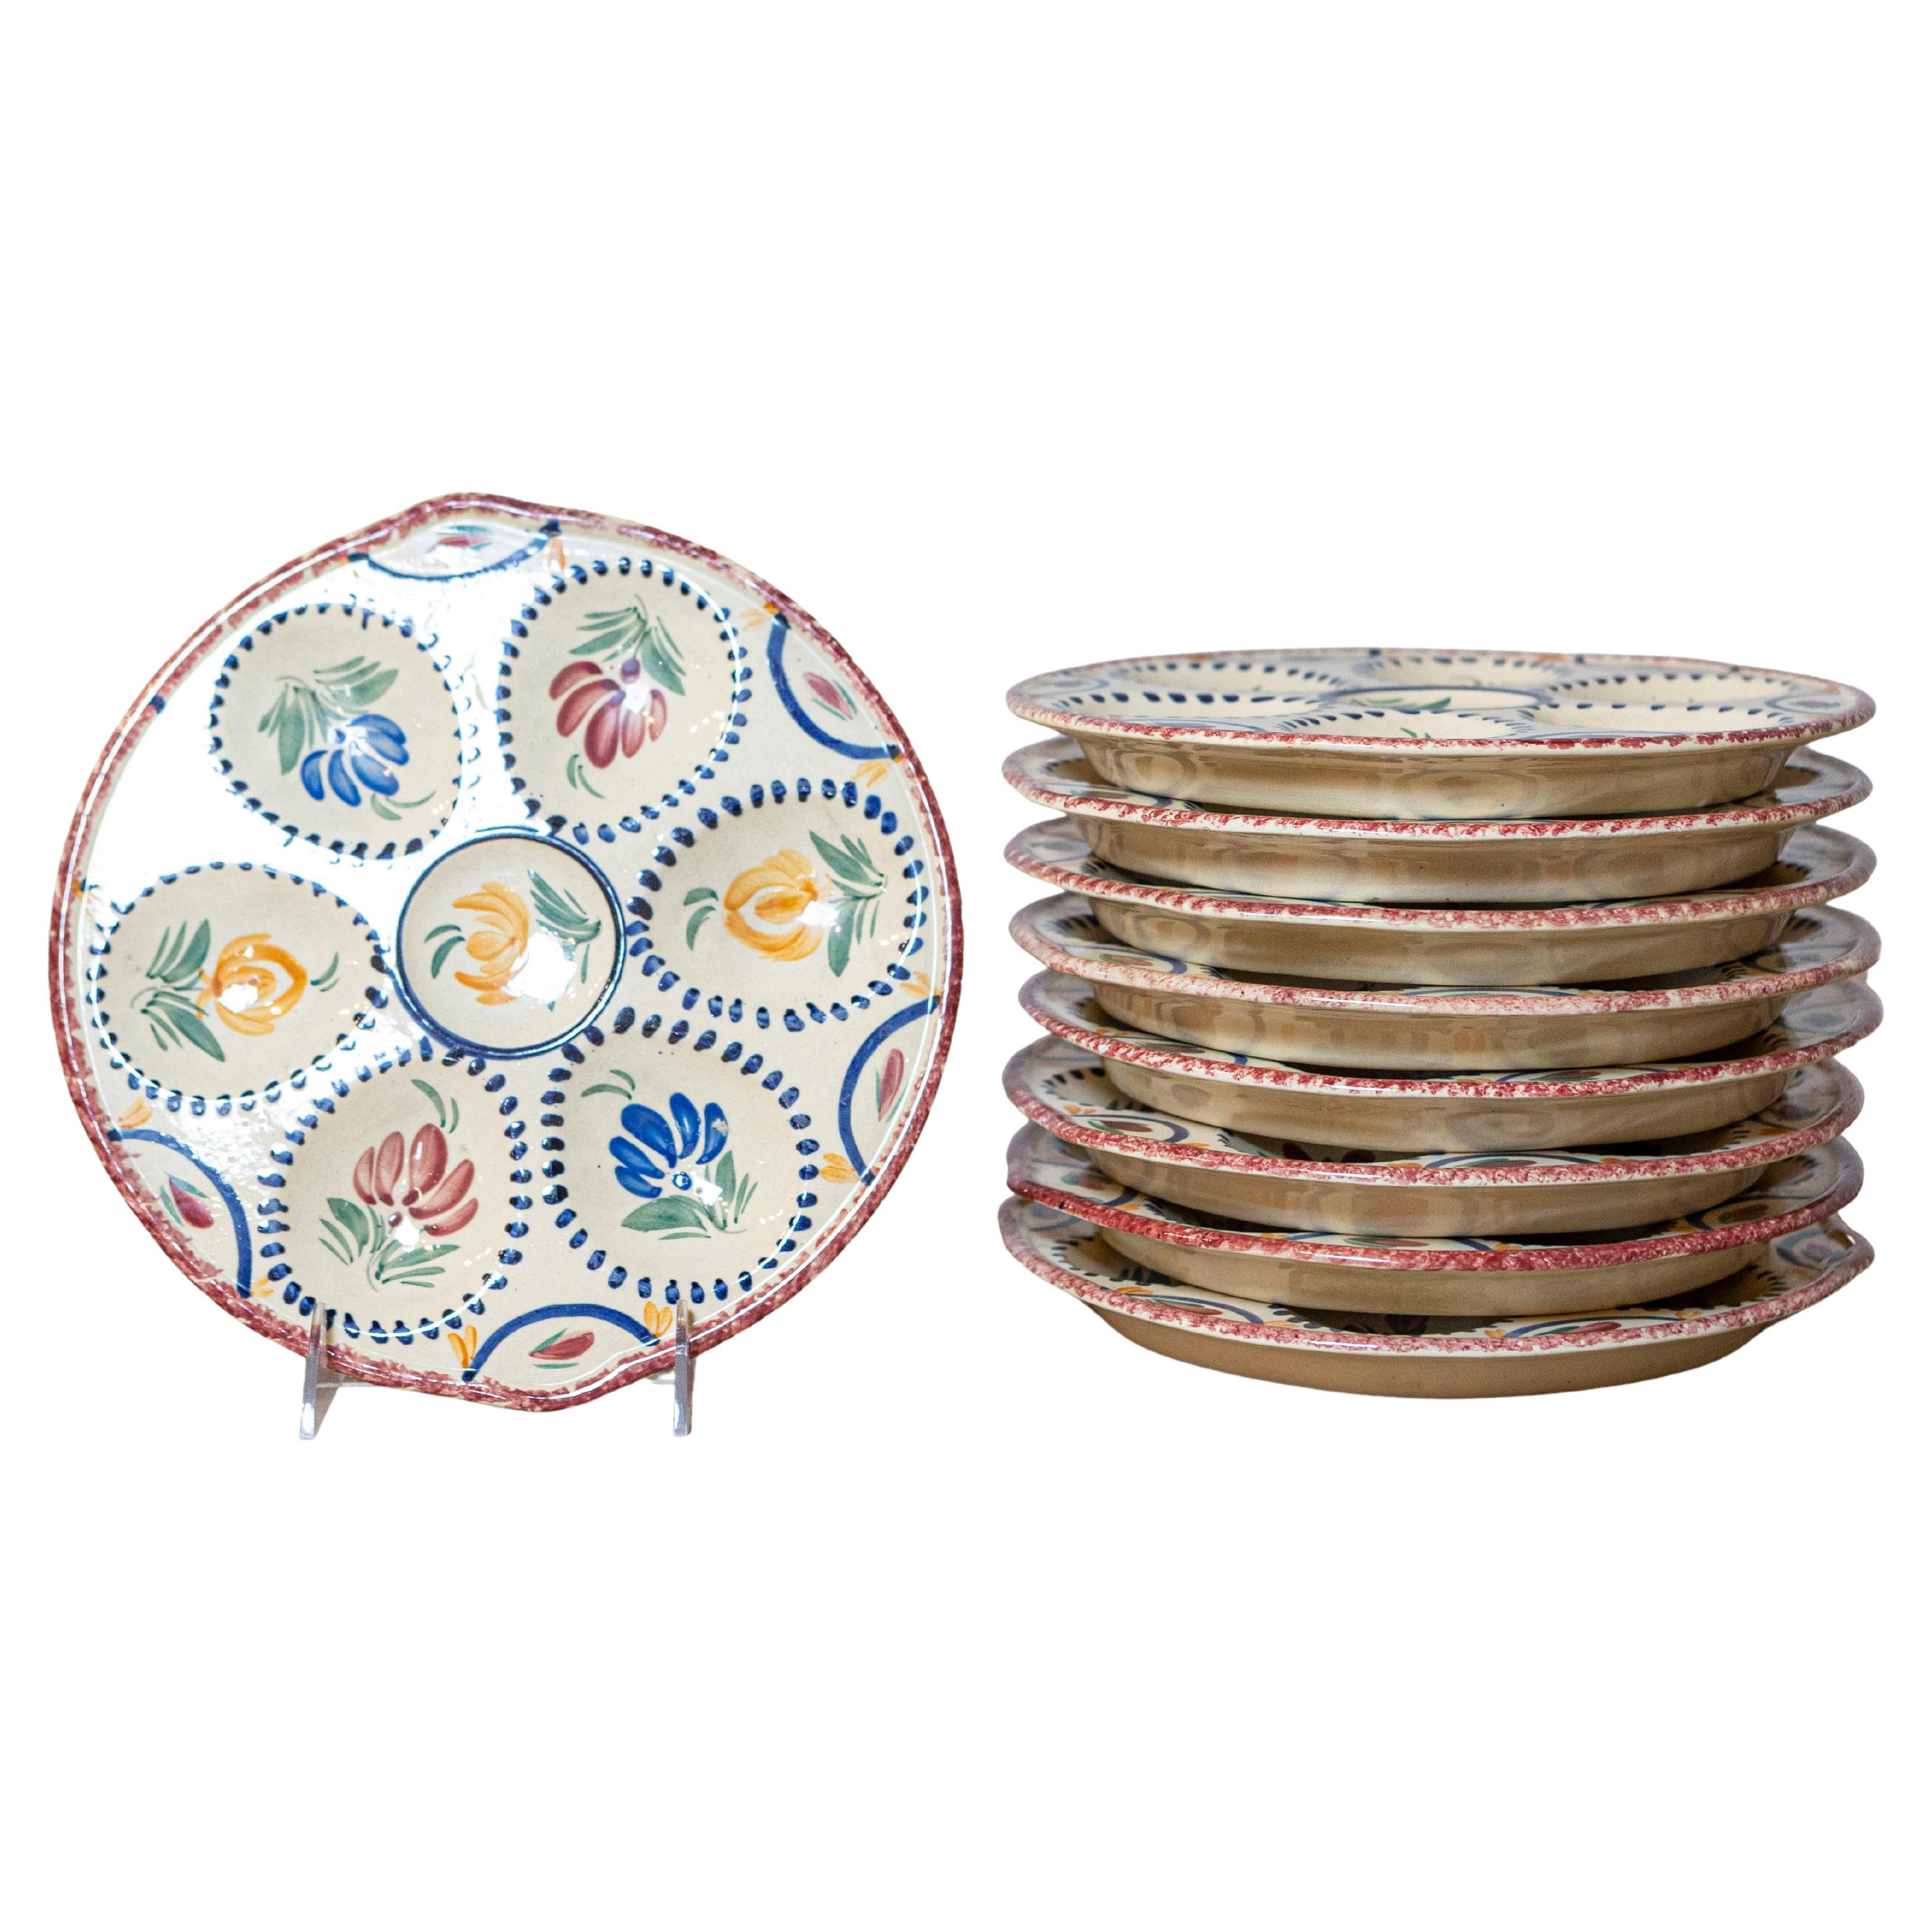 EightFrench Quimper 19th Century HB Manufacture Oyster Plates with Floral Motifs